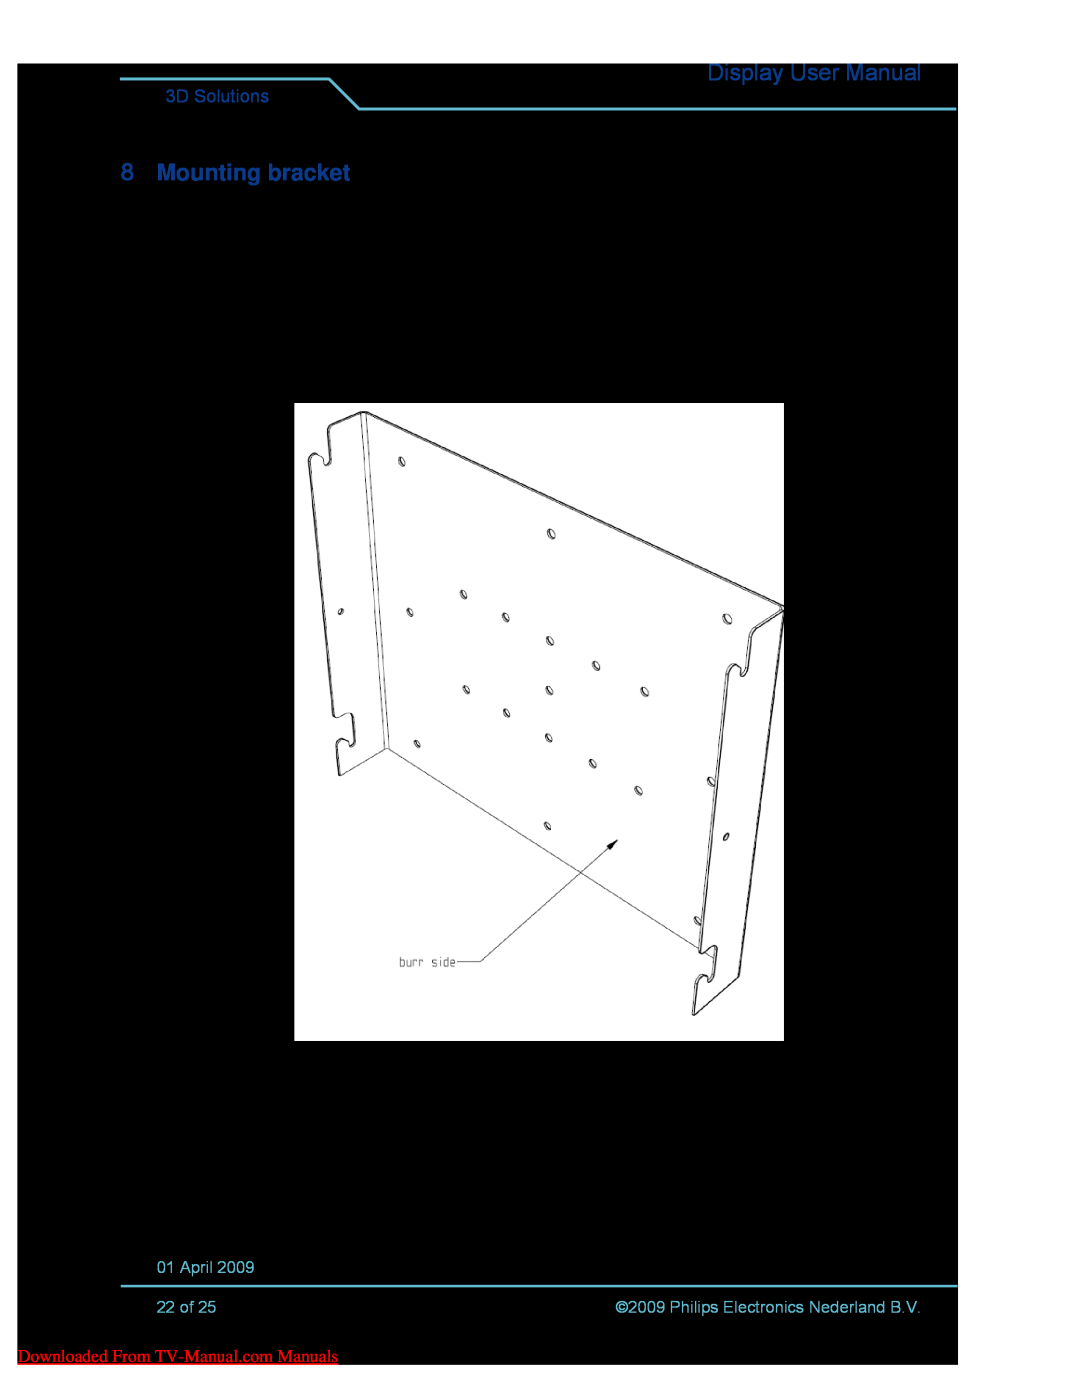 Philips 42-3D6W01/00 8Mounting bracket, Display User Manual, 3D Solutions, April, 22 of, Philips Electronics Nederland B.V 